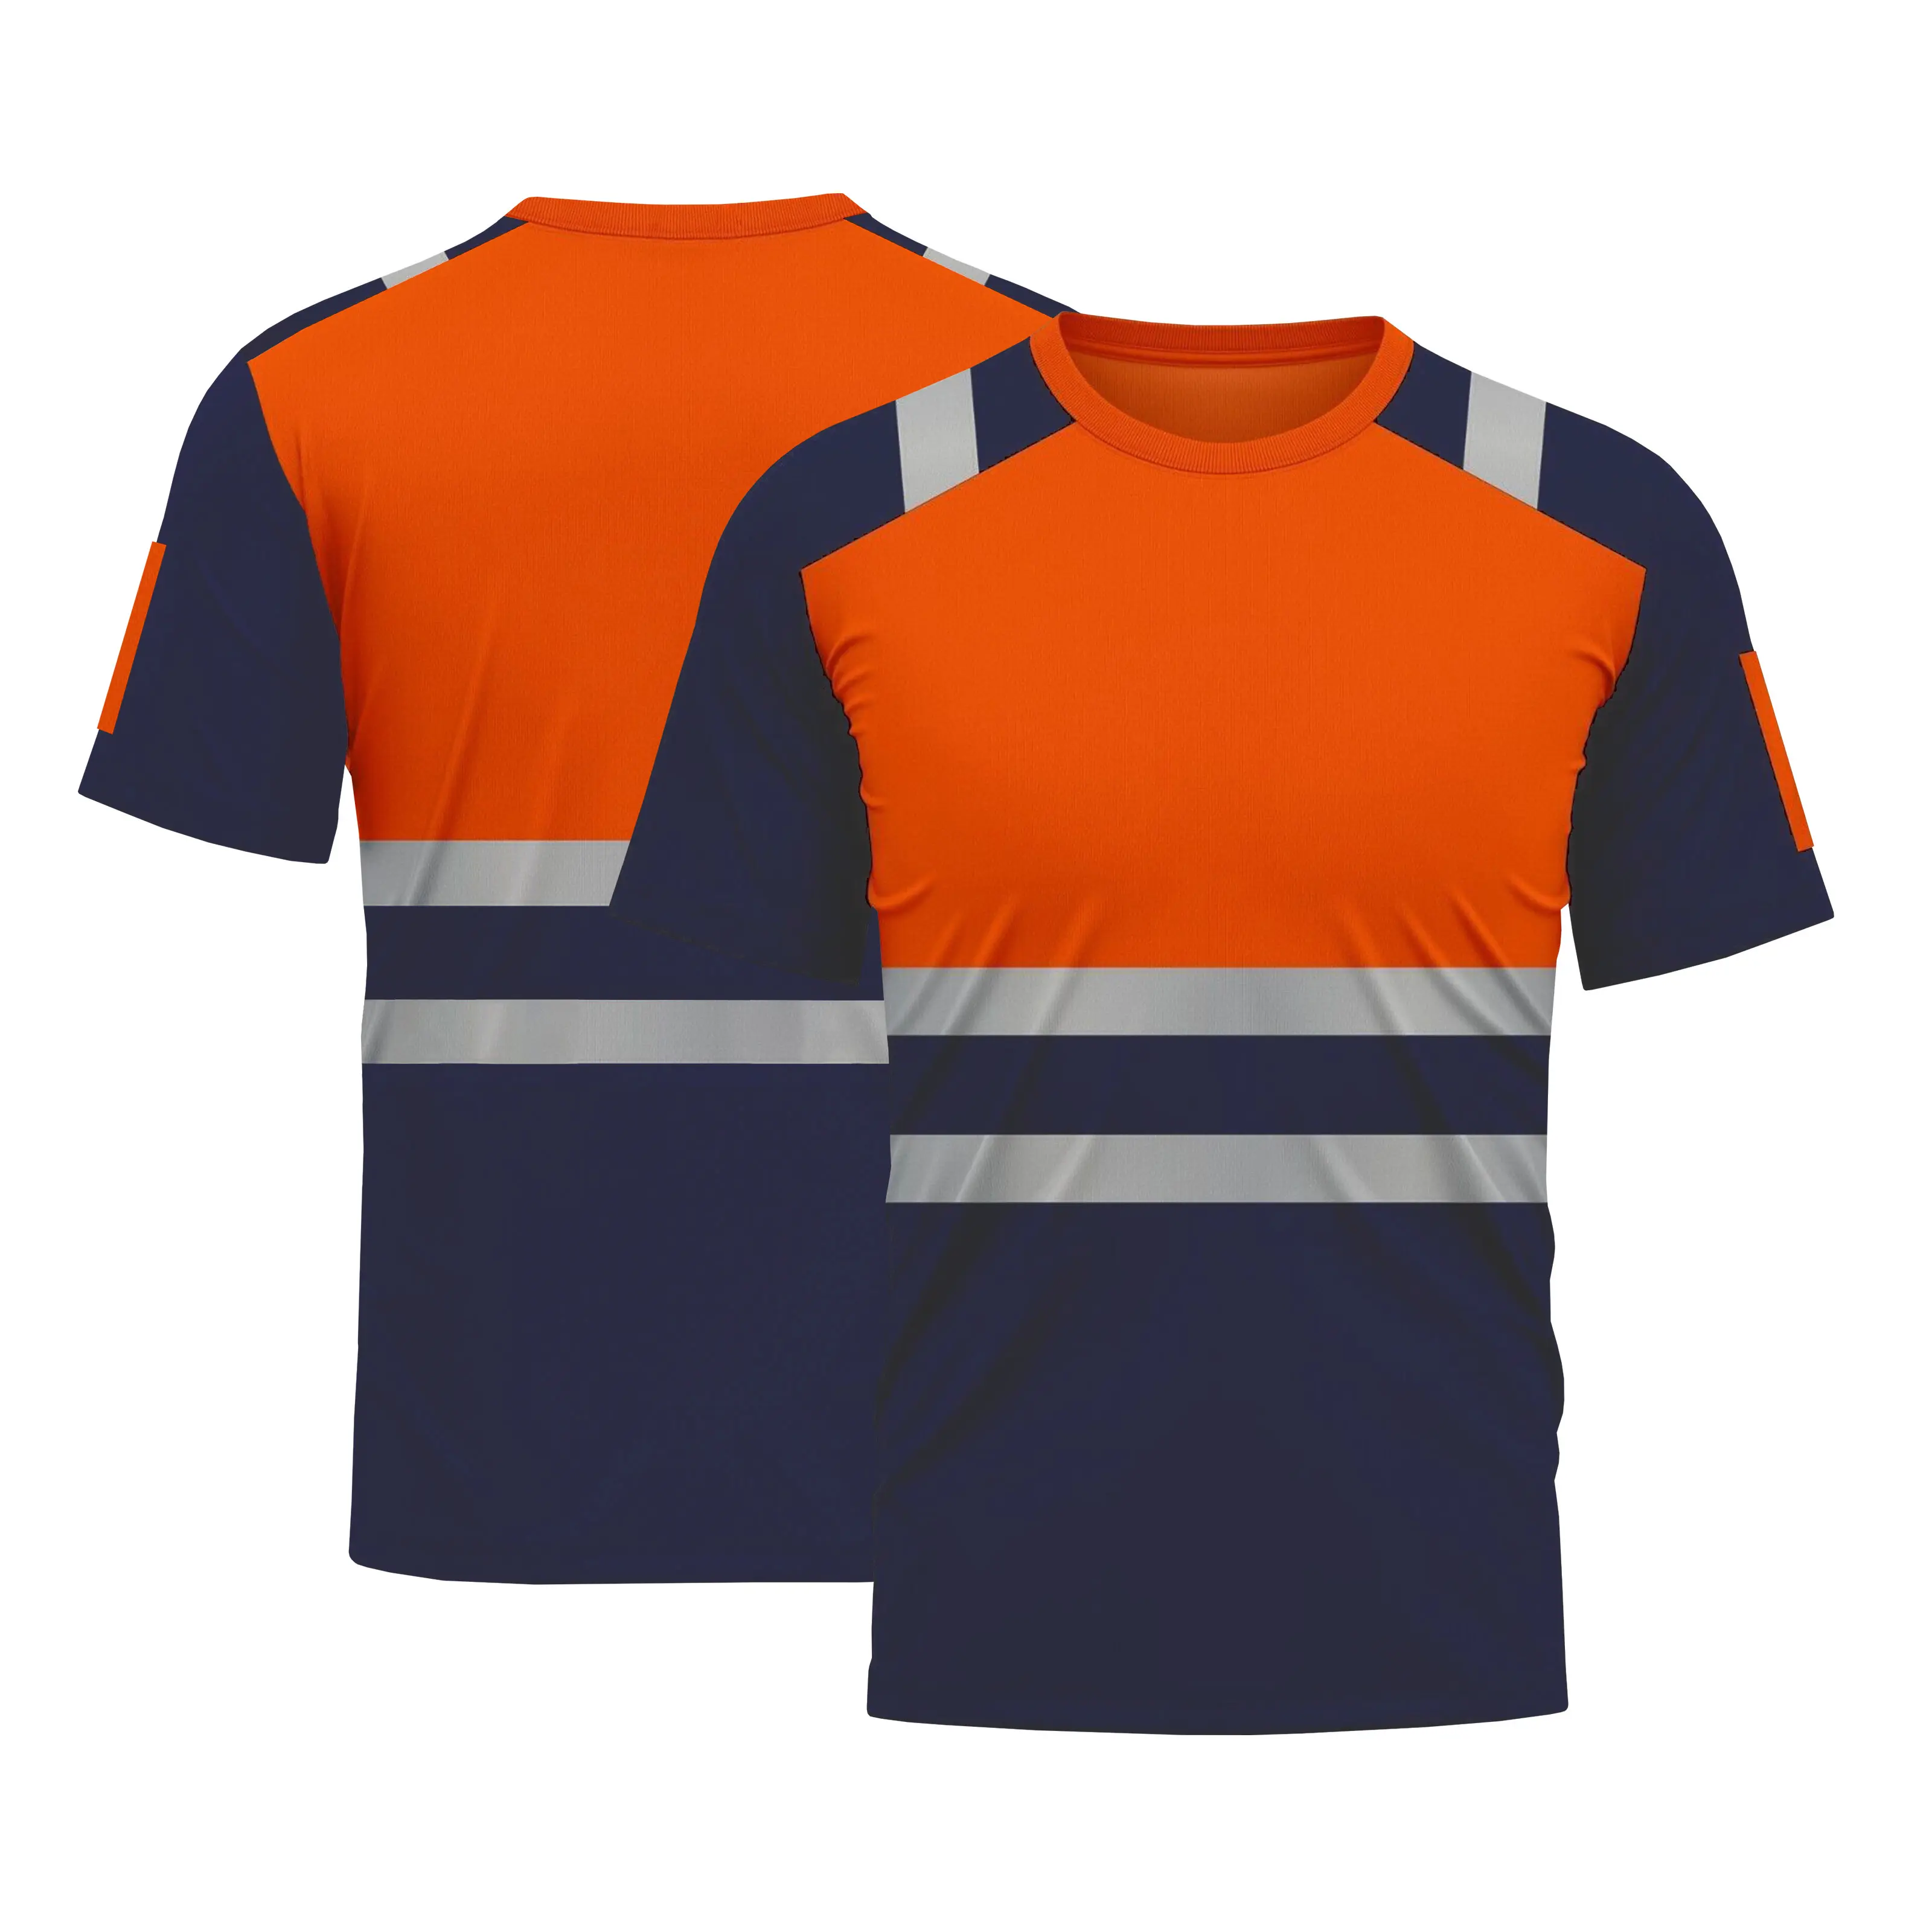 Hivis two tone Short Sleeve Work Polo T Shirt Orange Fluorescent Polo T Shirts